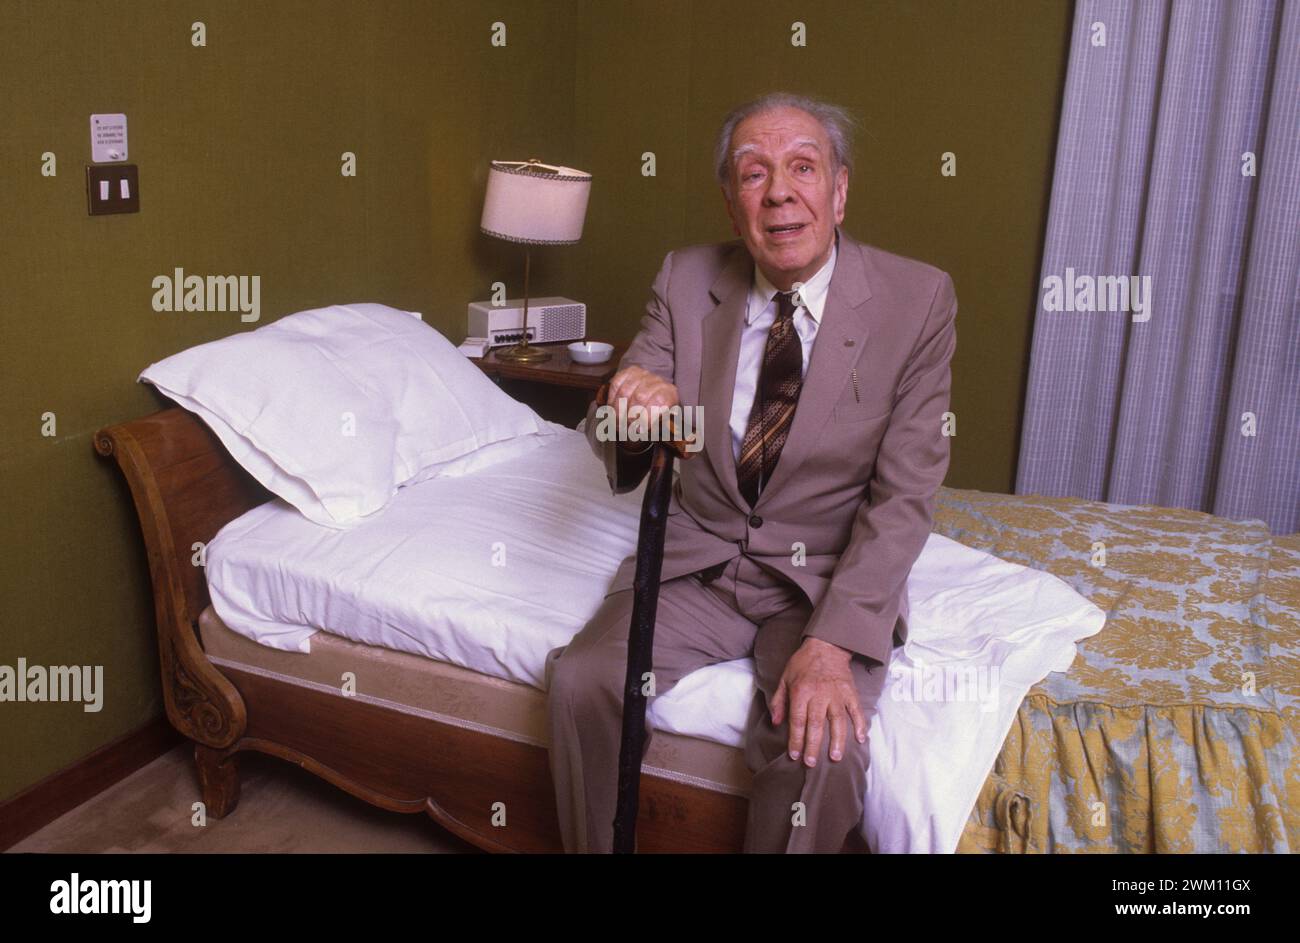 3825314 Jorge Luis Borges; (add.info.: Rome, Westin Excelsior Hotel, 1981. Argentinian writer Jorge Luis Borges in his room / Roma, Hotel Westin Excelsior, 1981. Lo scrittore argentino Jorge Luis Borges nella sua stanza); © Marcello Mencarini. All rights reserved 2024. Stock Photo